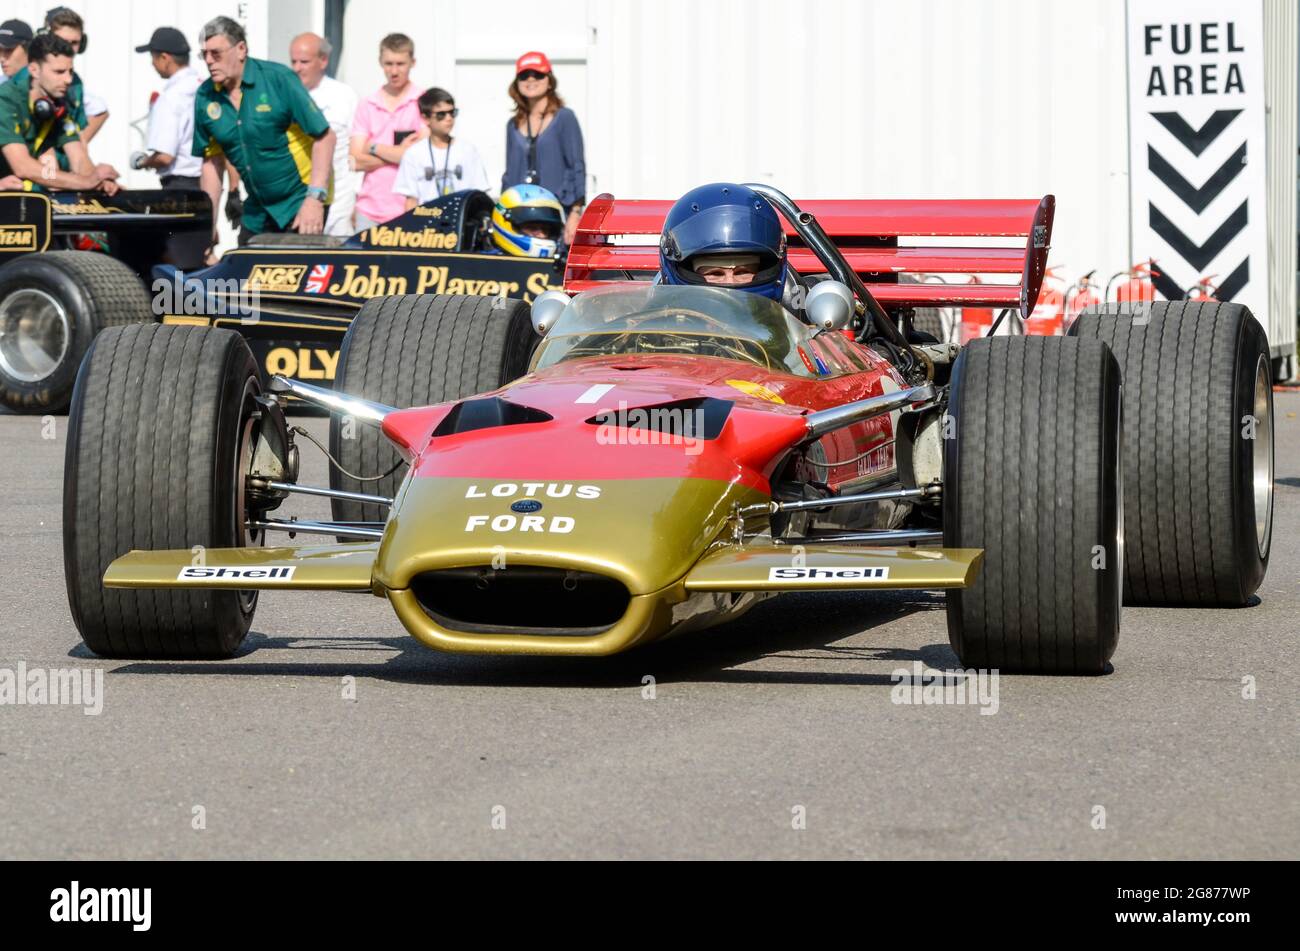 1968 Lotus 49 Grand Prix, Formula 1 racing car at the Goodwood Festival of Speed 2013. Gold Leaf sponsorship colours red and gold. 1960s F1 vintage Stock Photo